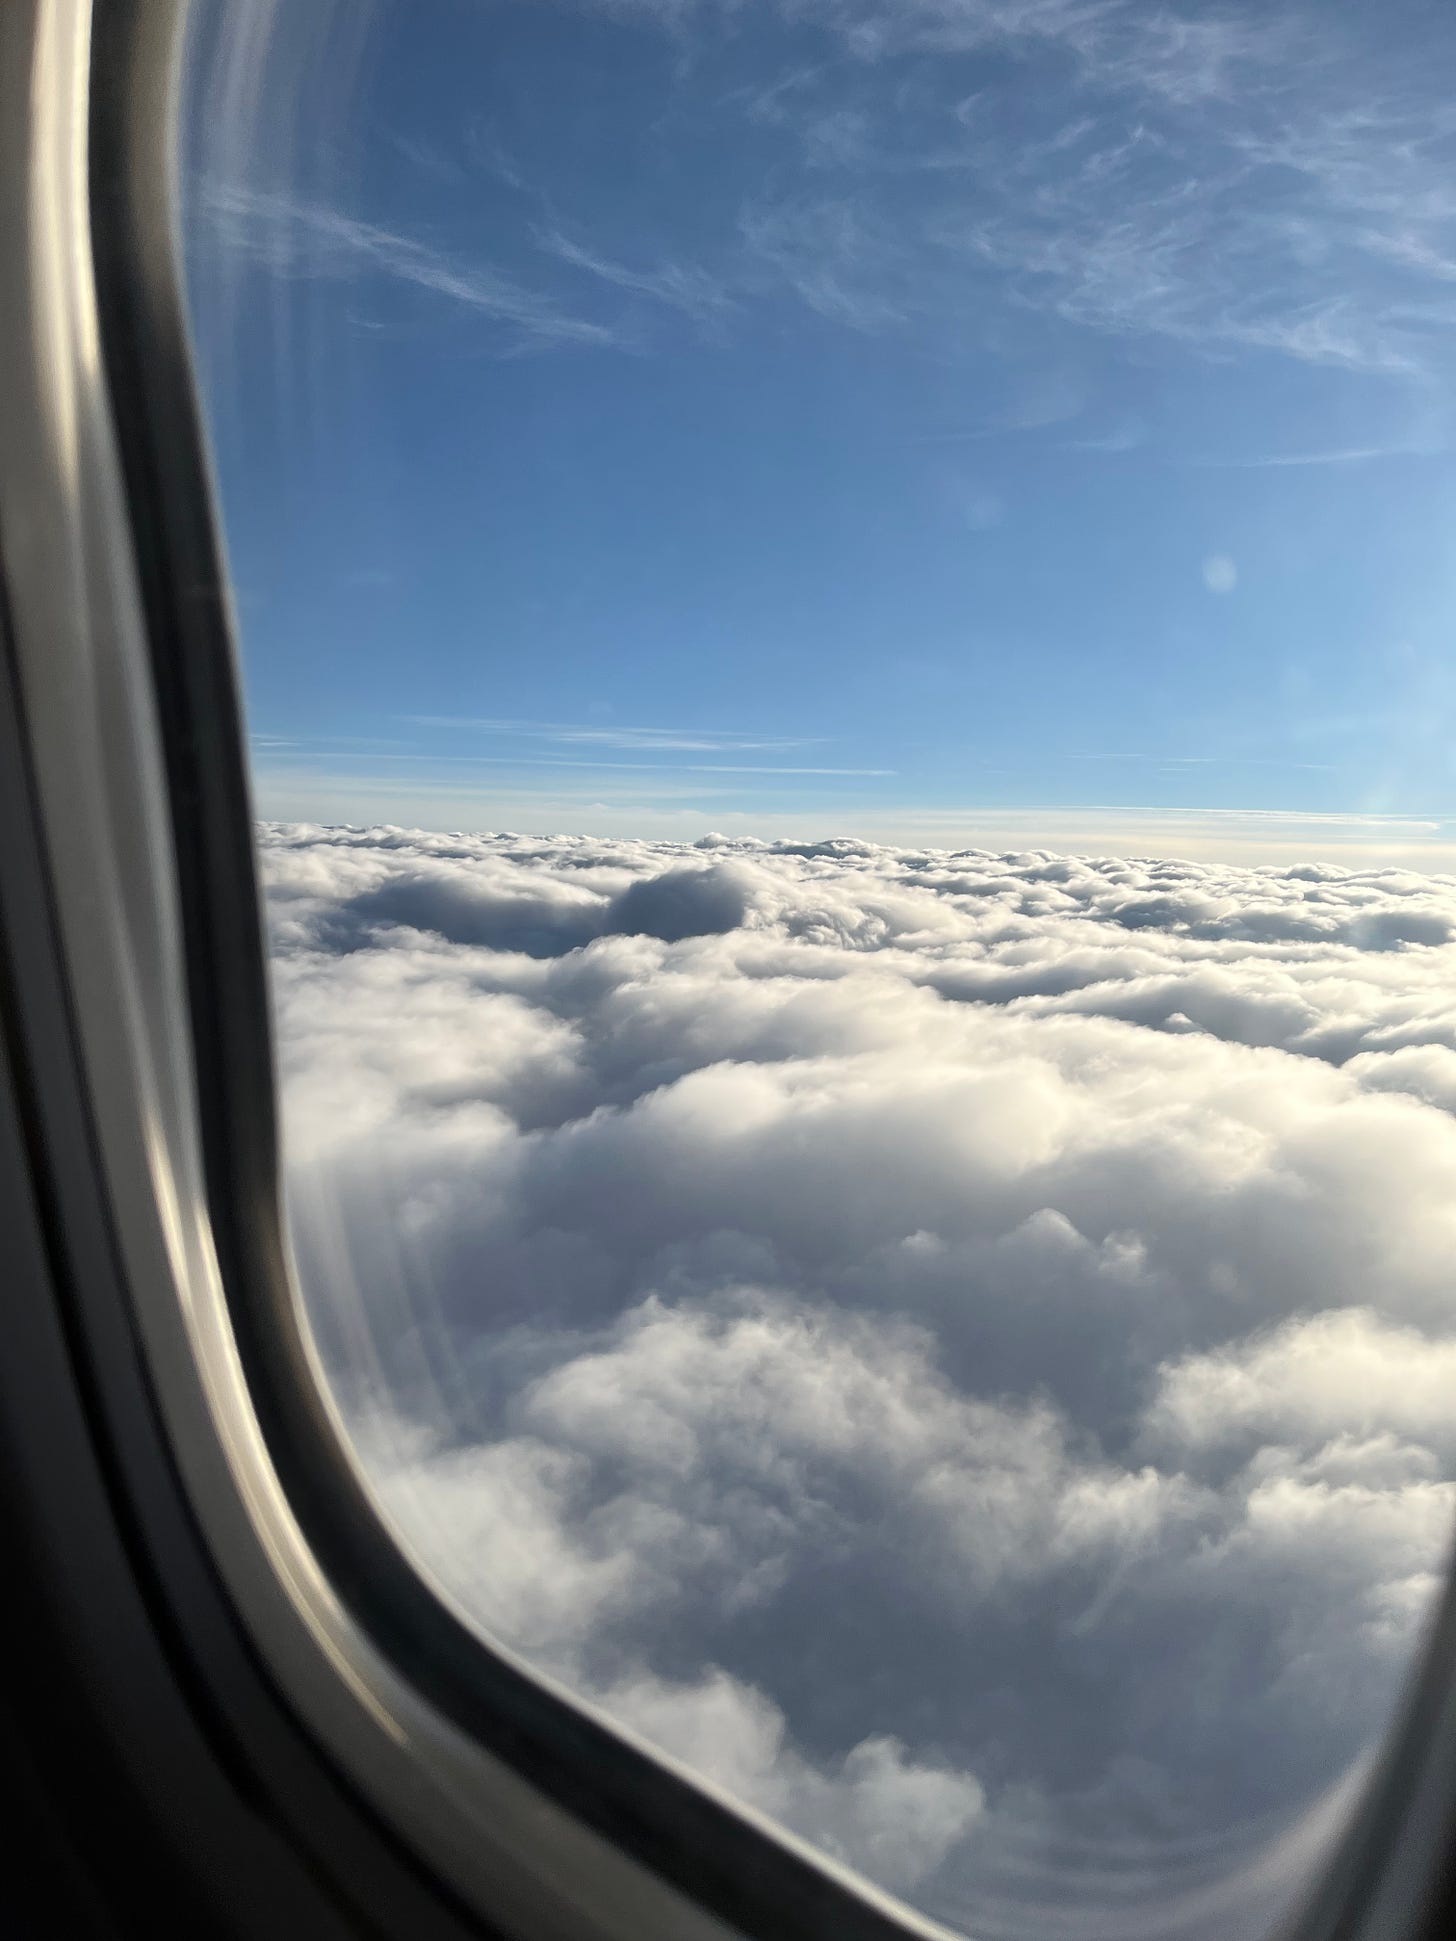 Picture taken of window in airplane, showing blue sky and clouds